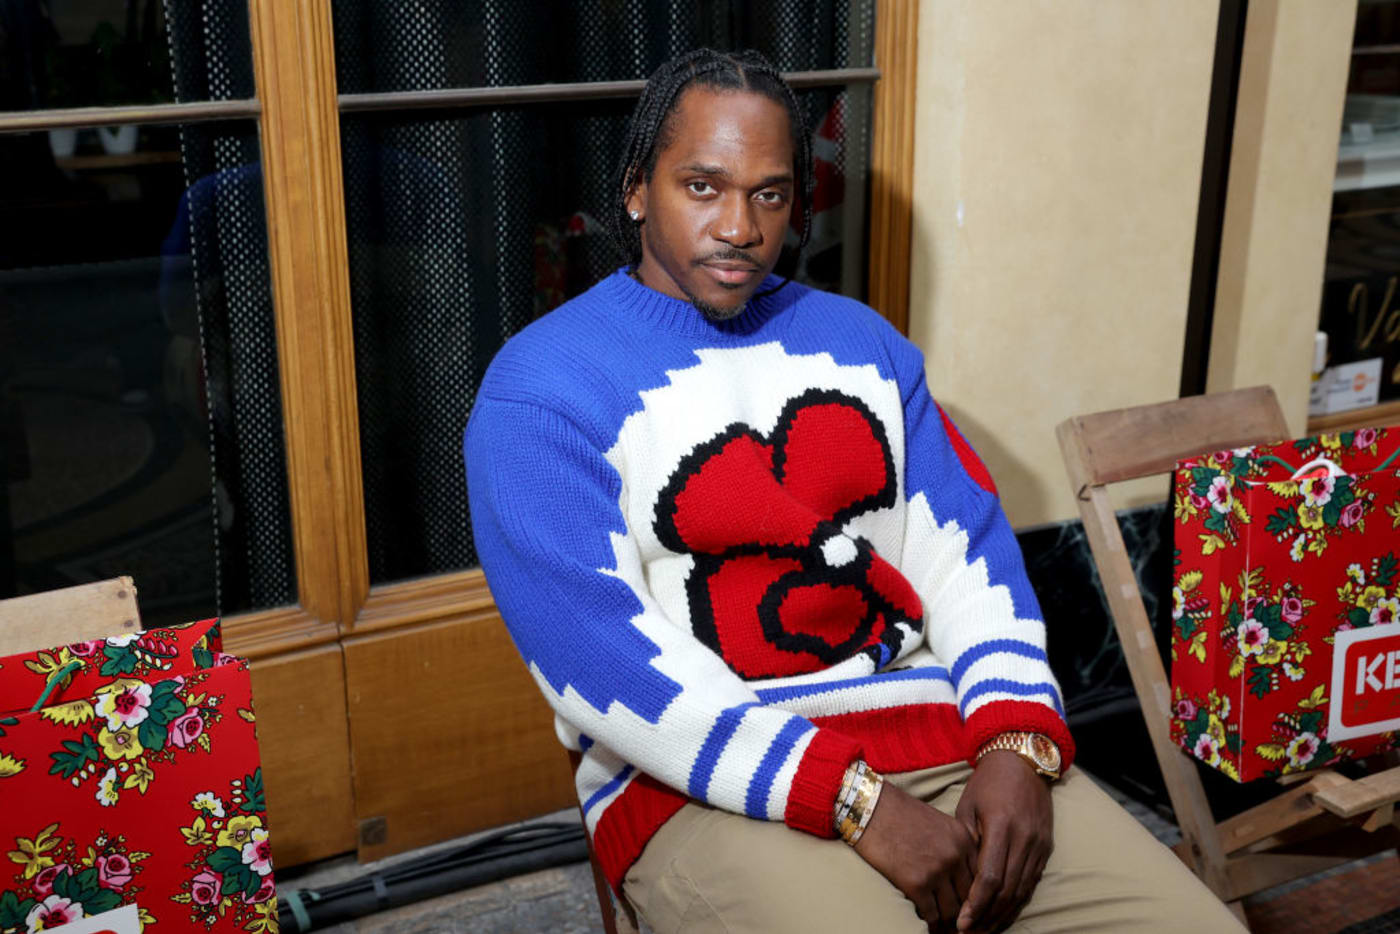 Pusha T at the Kenzo fashion show in Paris